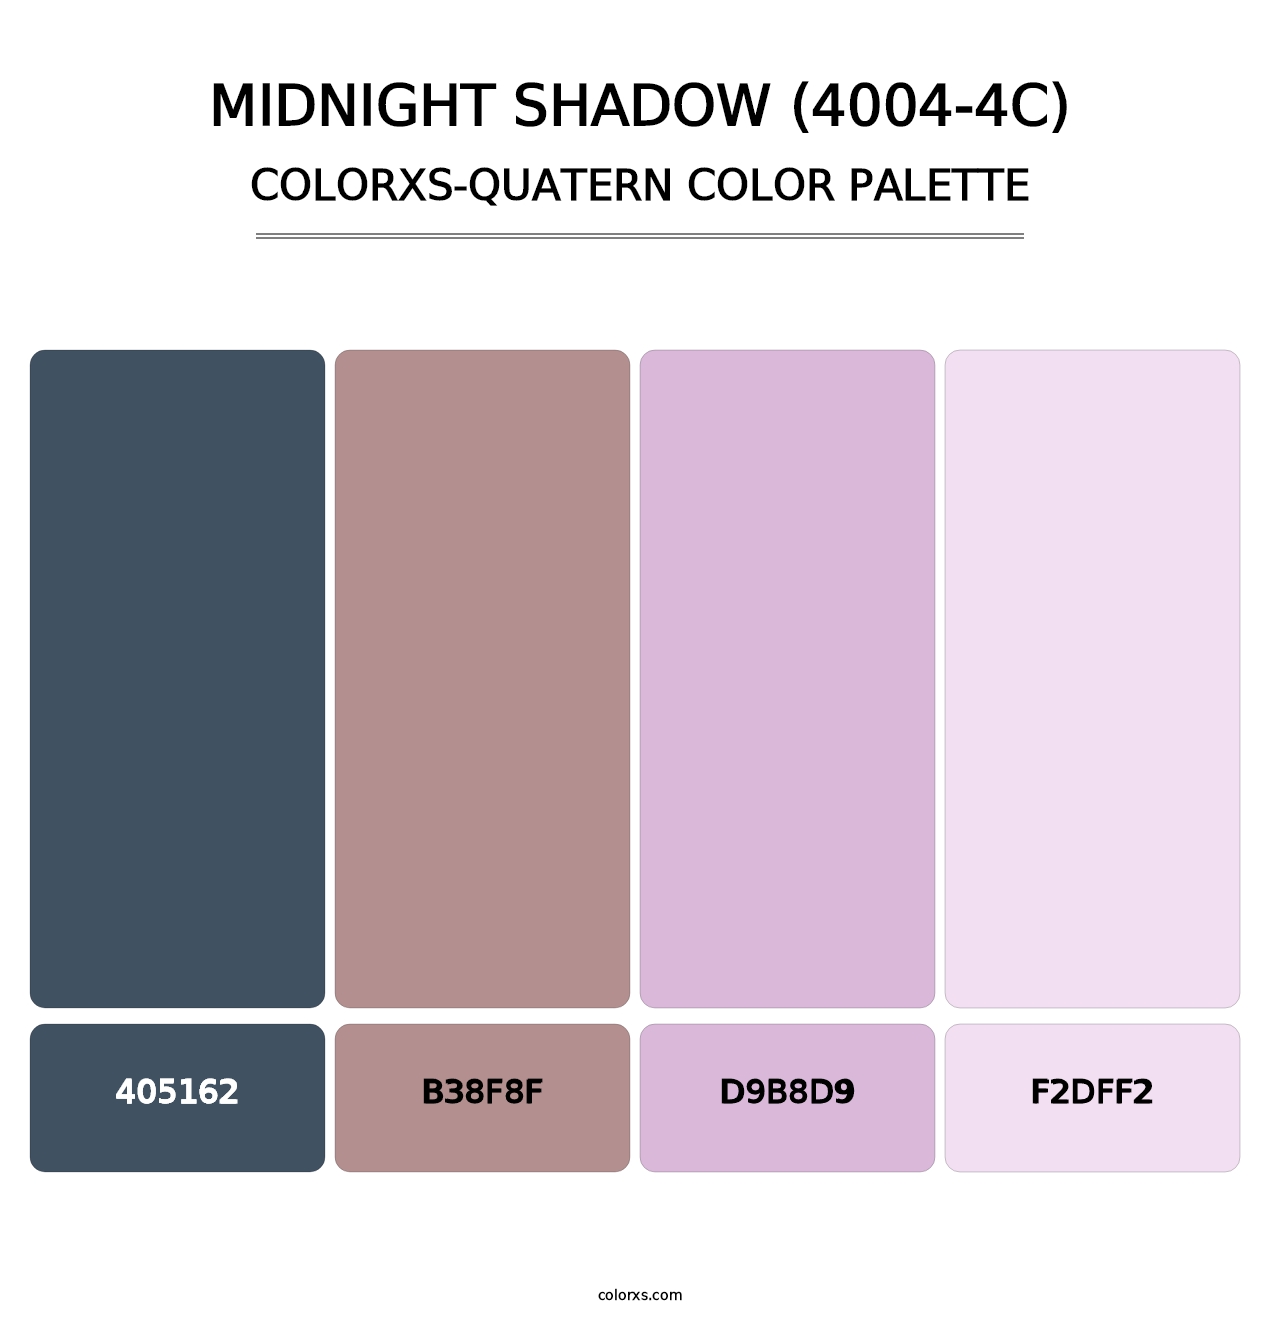 Midnight Shadow (4004-4C) - Colorxs Quatern Palette